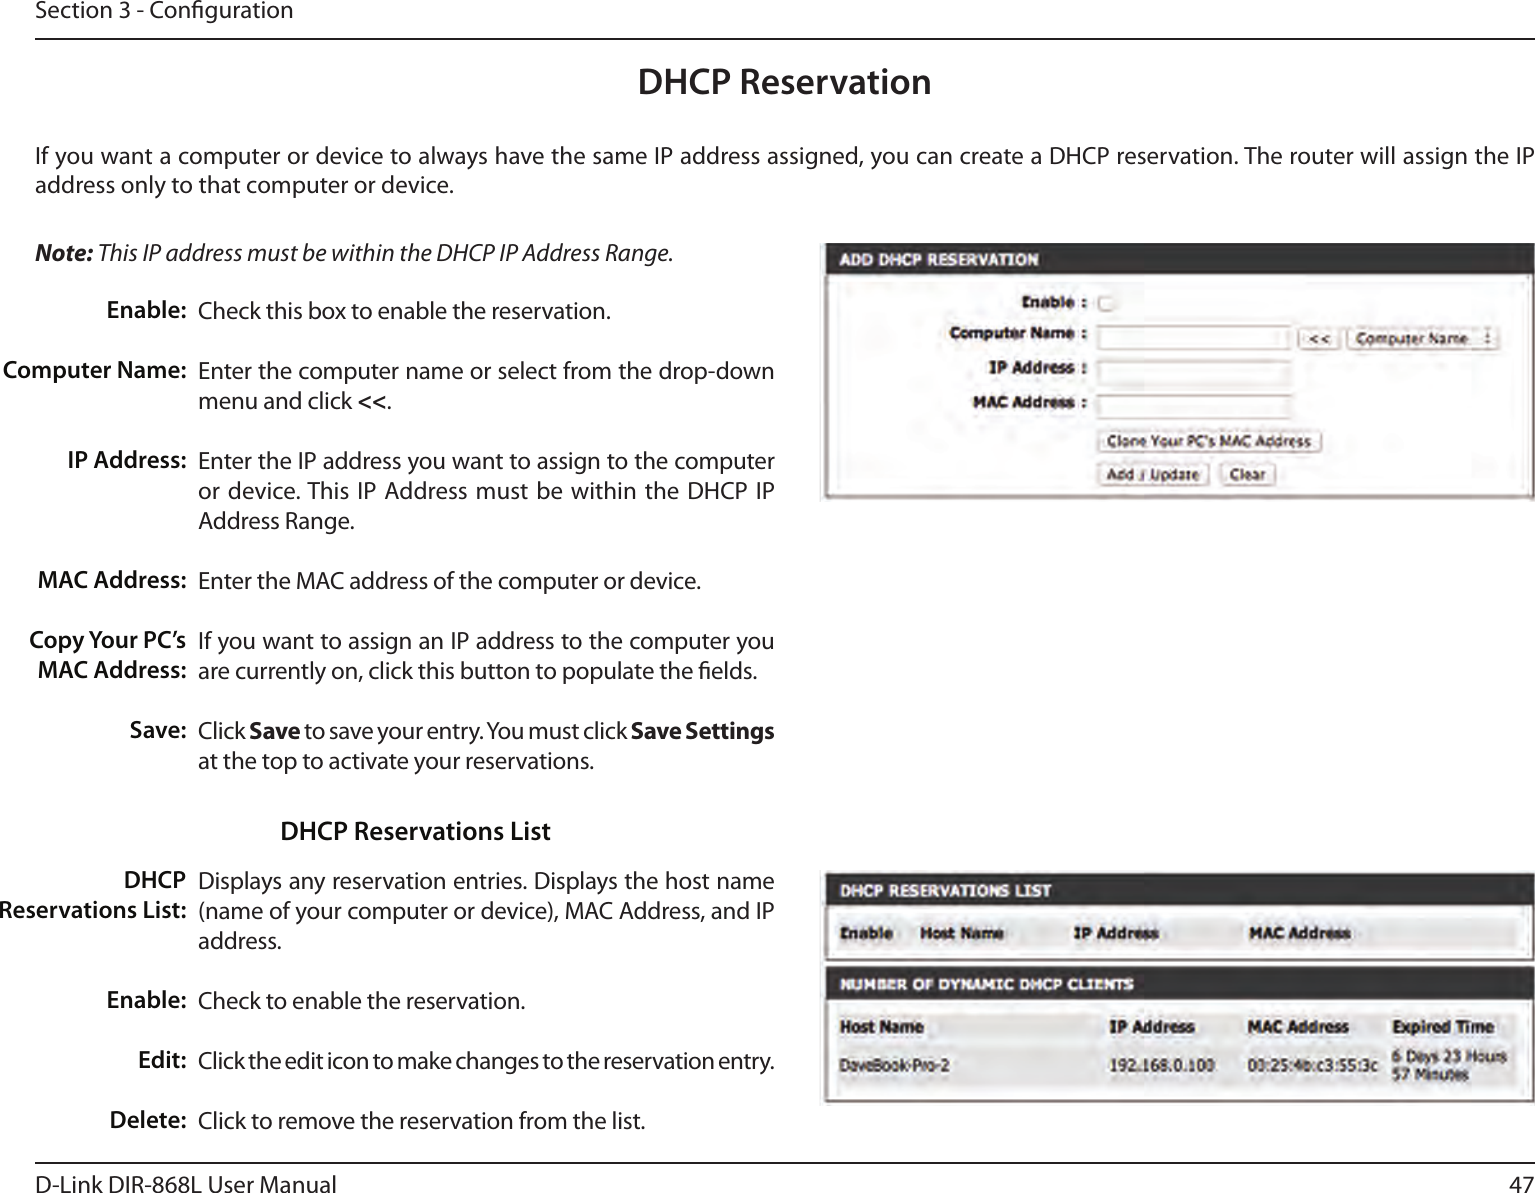 47D-Link DIR-868L User ManualSection 3 - CongurationDHCP ReservationIf you want a computer or device to always have the same IP address assigned, you can create a DHCP reservation. The router will assign the IP address only to that computer or device. Note: This IP address must be within the DHCP IP Address Range.Check this box to enable the reservation.Enter the computer name or select from the drop-down menu and click &lt;&lt;.Enter the IP address you want to assign to the computer or device. This IP Address must  be within the DHCP  IP Address Range.Enter the MAC address of the computer or device.If you want to assign an IP address to the computer you are currently on, click this button to populate the elds. Click Save to save your entry. You must click Save Settings at the top to activate your reservations. Displays any reservation entries. Displays the host name (name of your computer or device), MAC Address, and IP address.Check to enable the reservation.Click the edit icon to make changes to the reservation entry.Click to remove the reservation from the list.Enable:Computer Name:IP Address:MAC Address:Copy Your PC’s MAC Address:Save:DHCP Reservations List:Enable:Edit:Delete:DHCP Reservations List